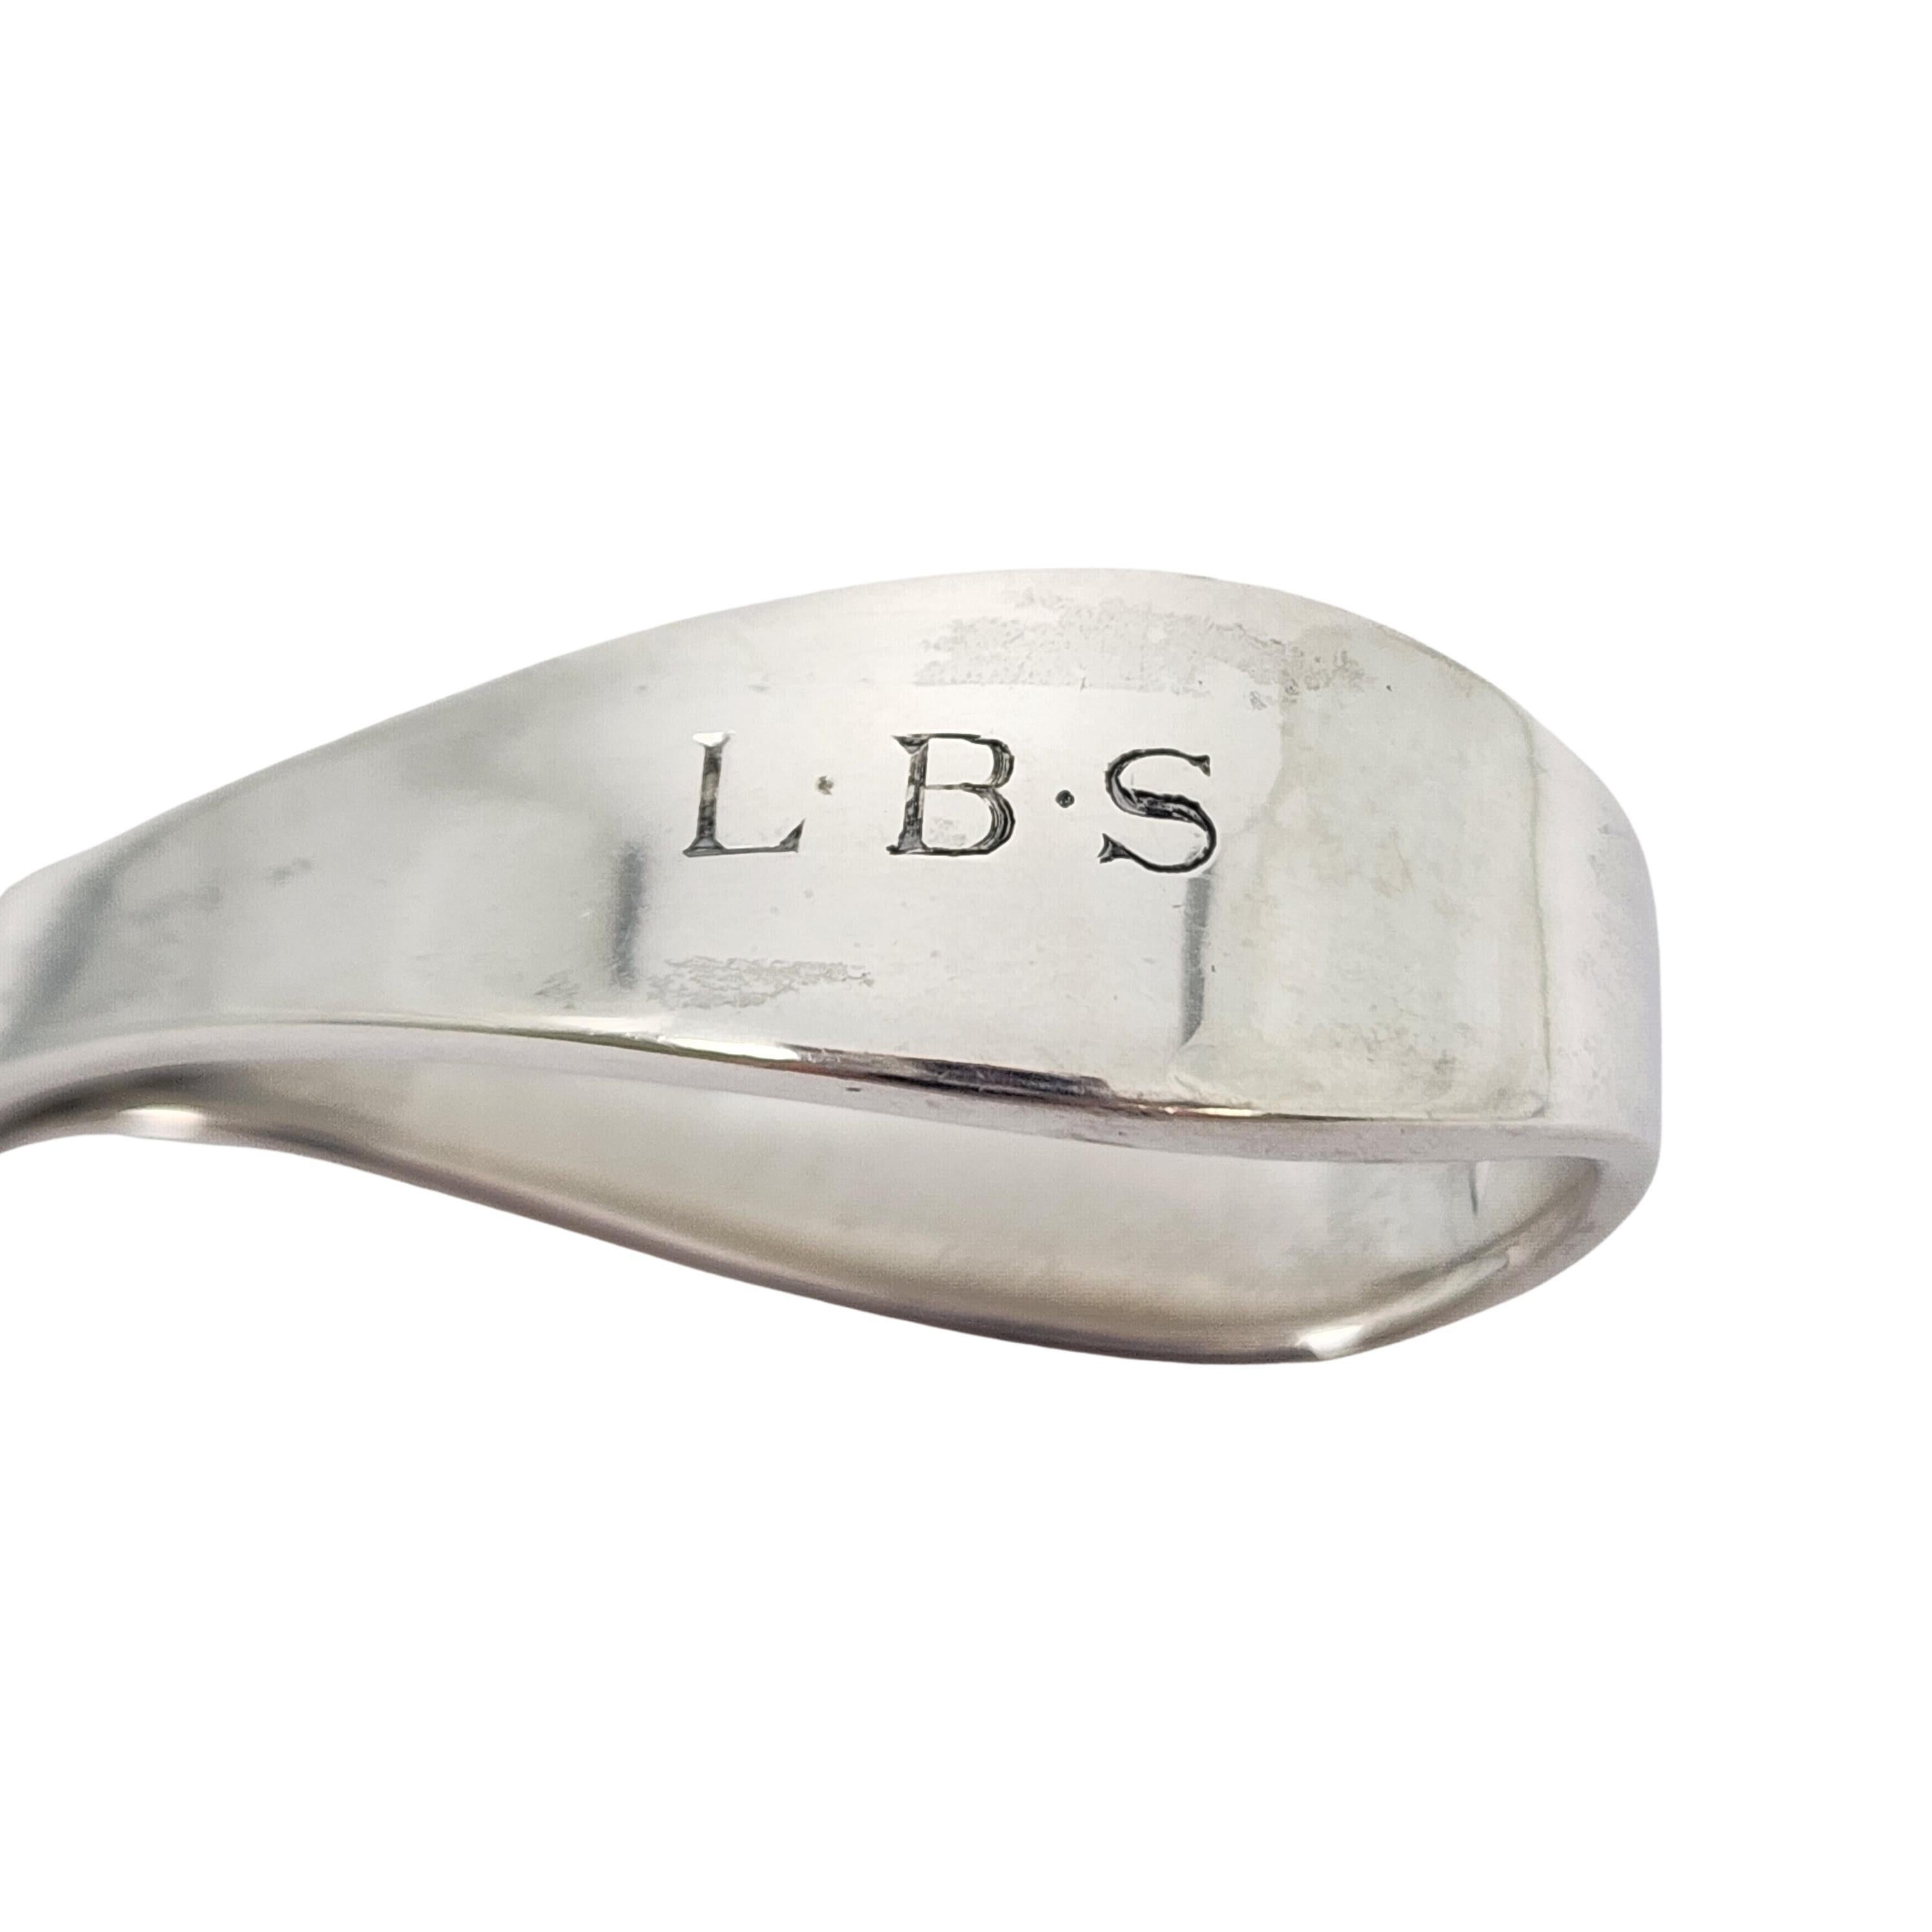 Tiffany & Co Sterling Silver Curved Loop Handle Baby Spoon w/Monogram #17262 For Sale 3